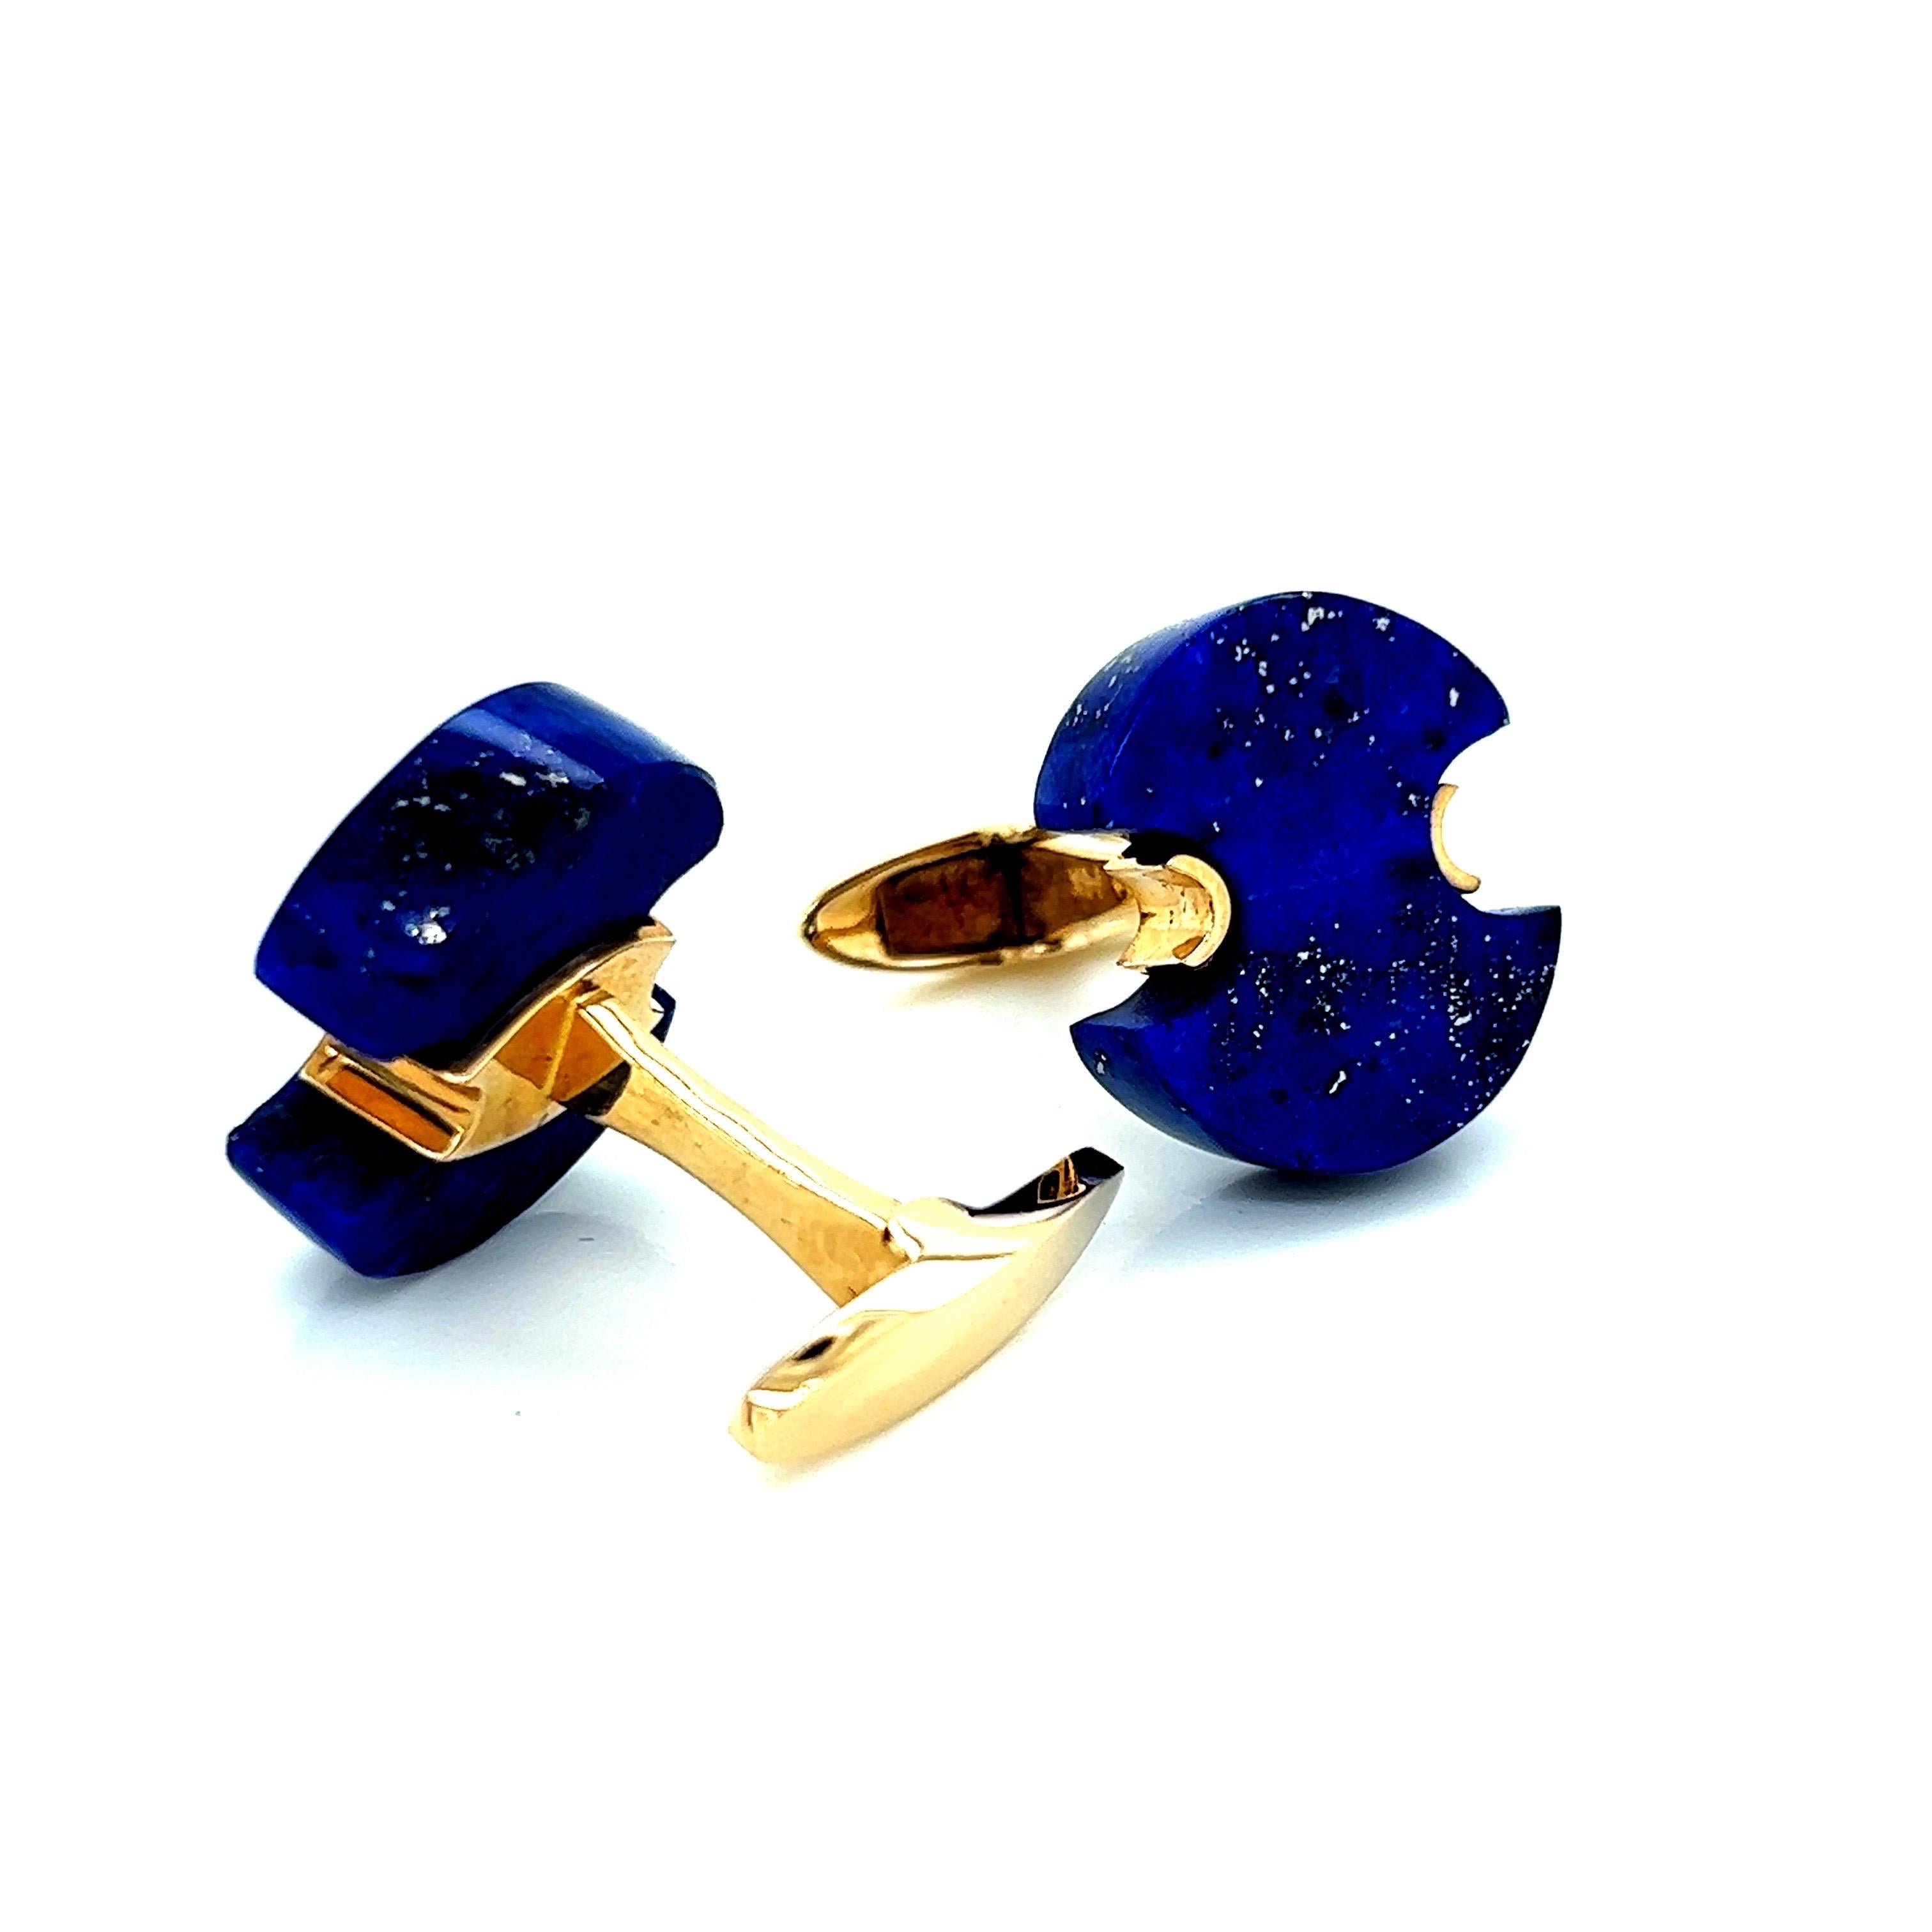 These cufflinks are a timeless and sophisticated piece of jewelry that are perfect for any occasion. They are crafted from 14k yellow gold, a high-quality material that is prized for its durability, strength, and rich color. The gold is carefully